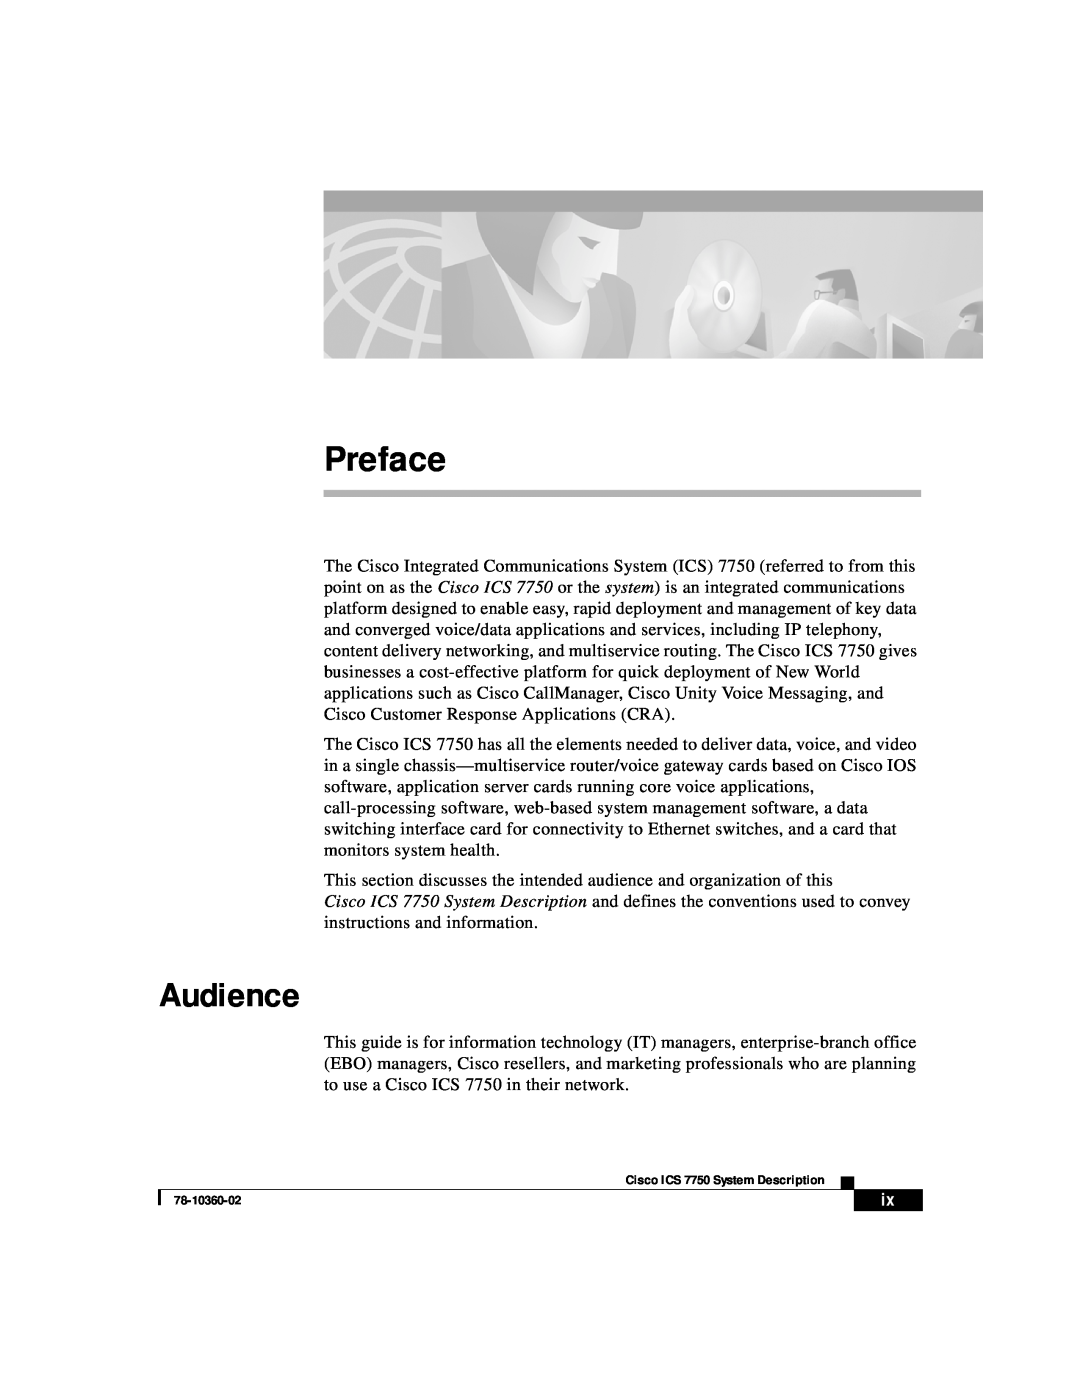 Cisco Systems ICS-7750 manual Preface, Audience 